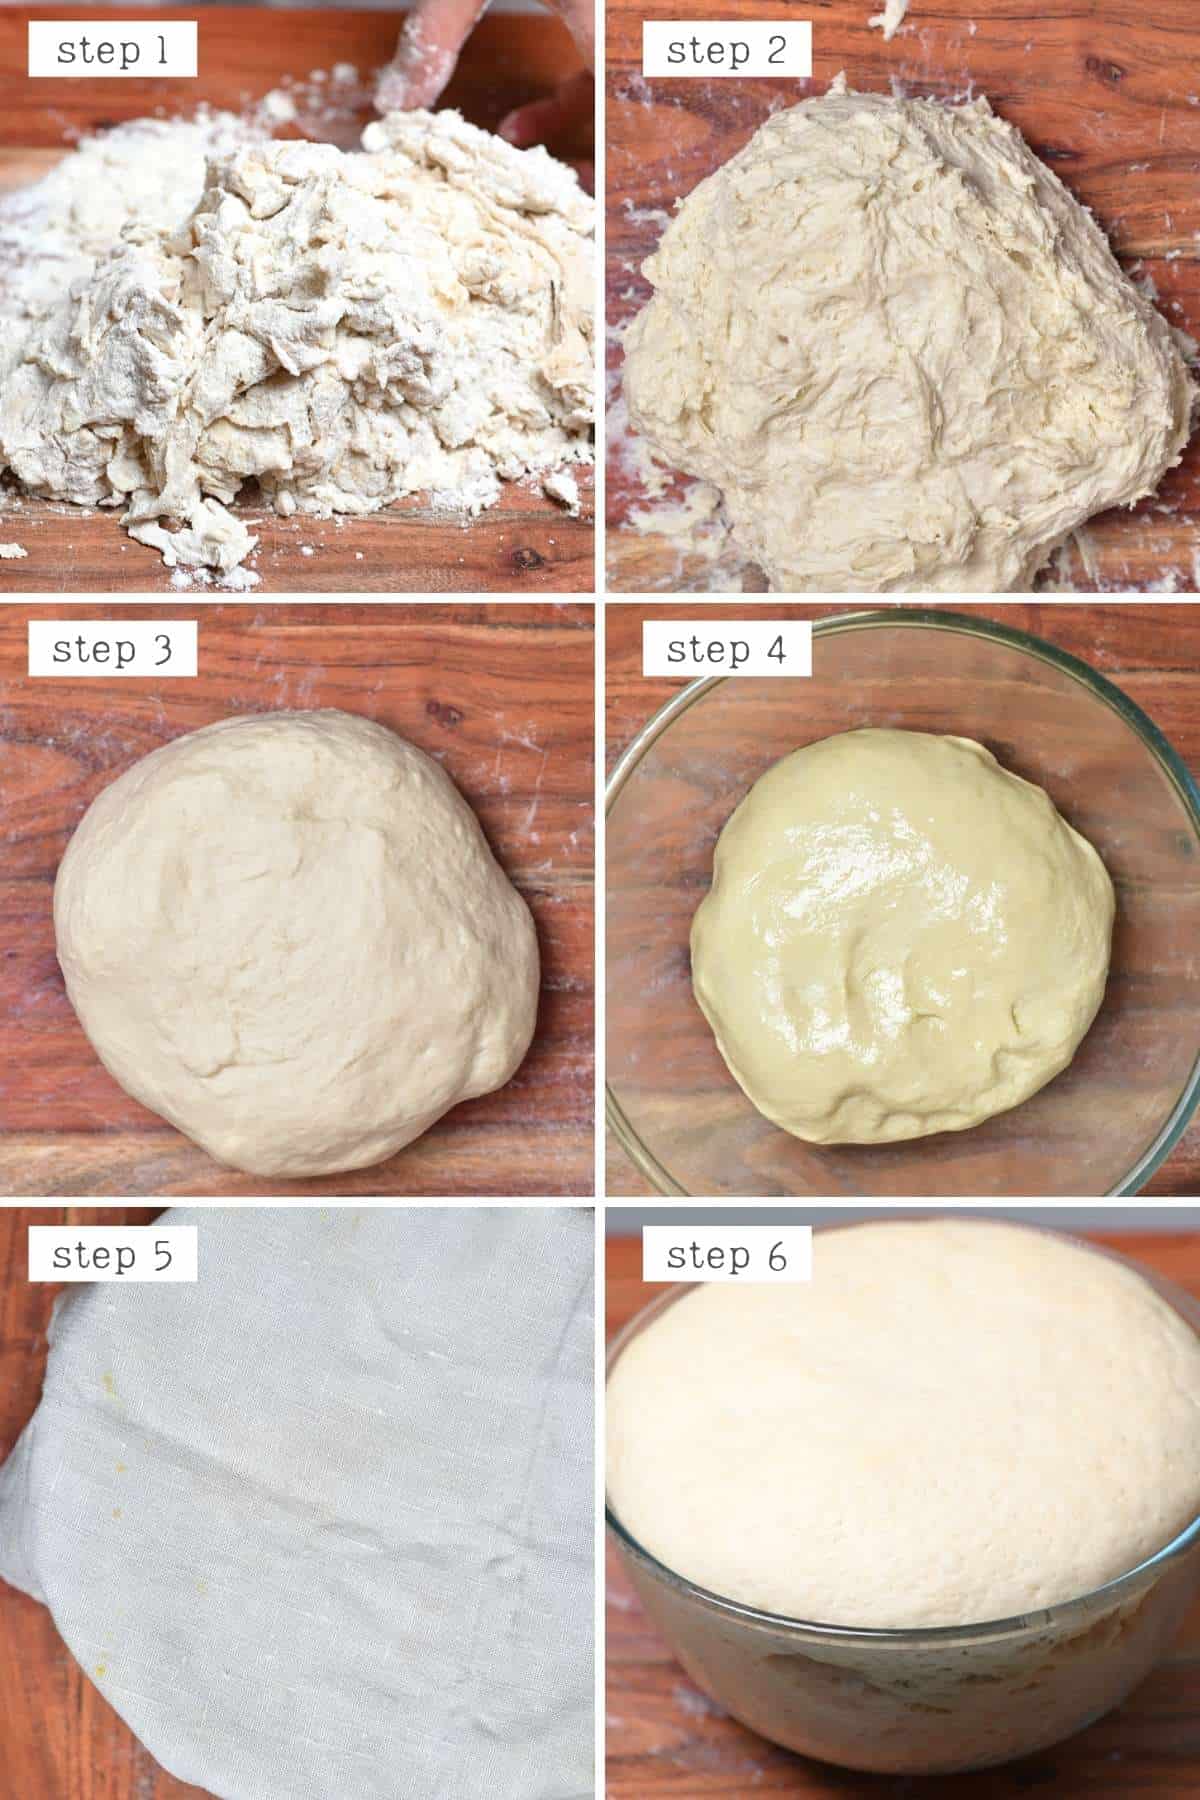 Steps for kneading and proofing dough